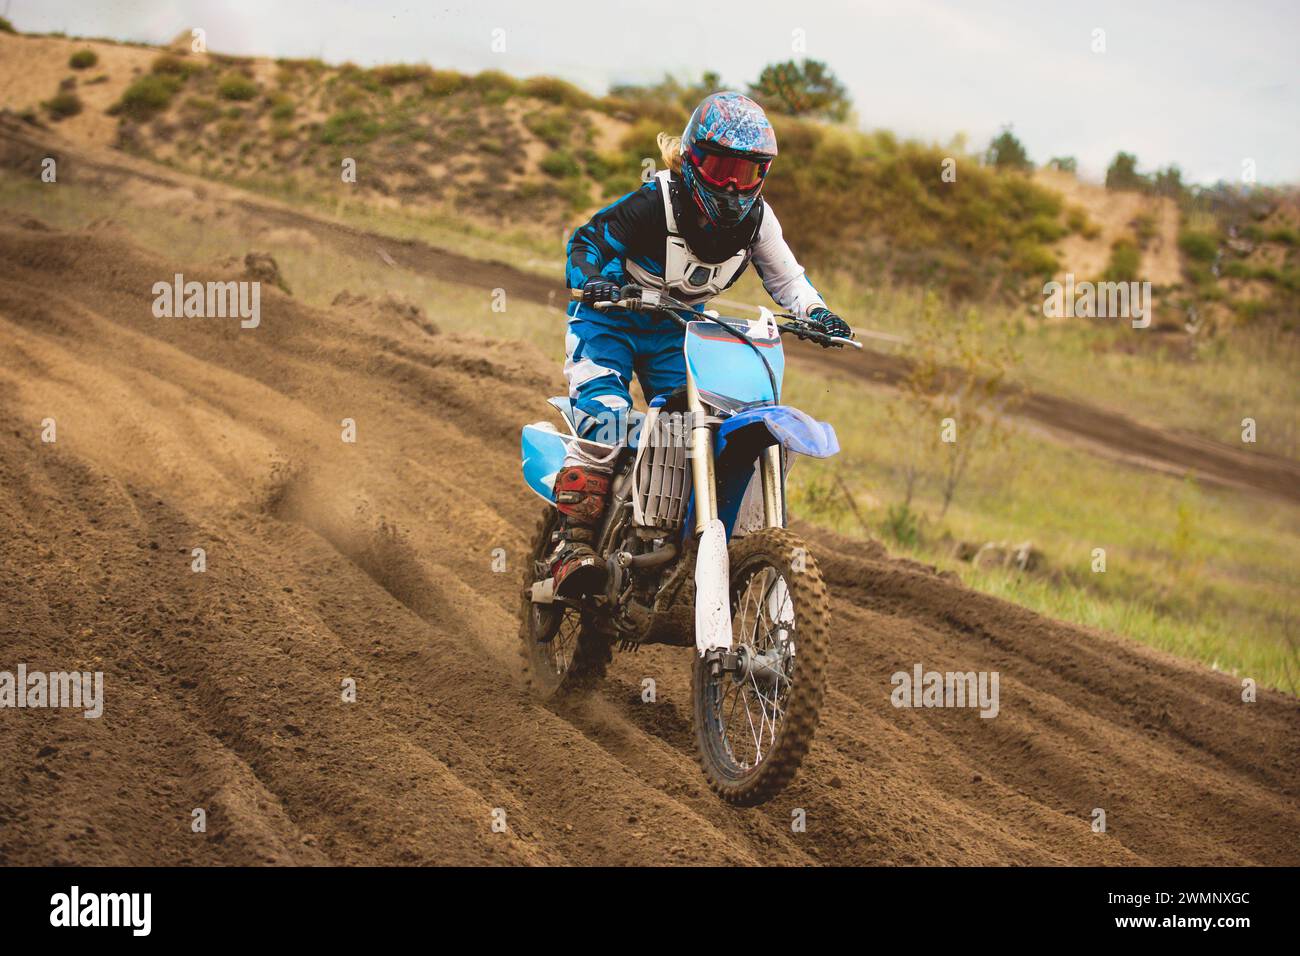 24 september 2016 - Volgsk, Russia, MX moto cross racing - Girl Bike Rider rides on a motorcycle Stock Photo